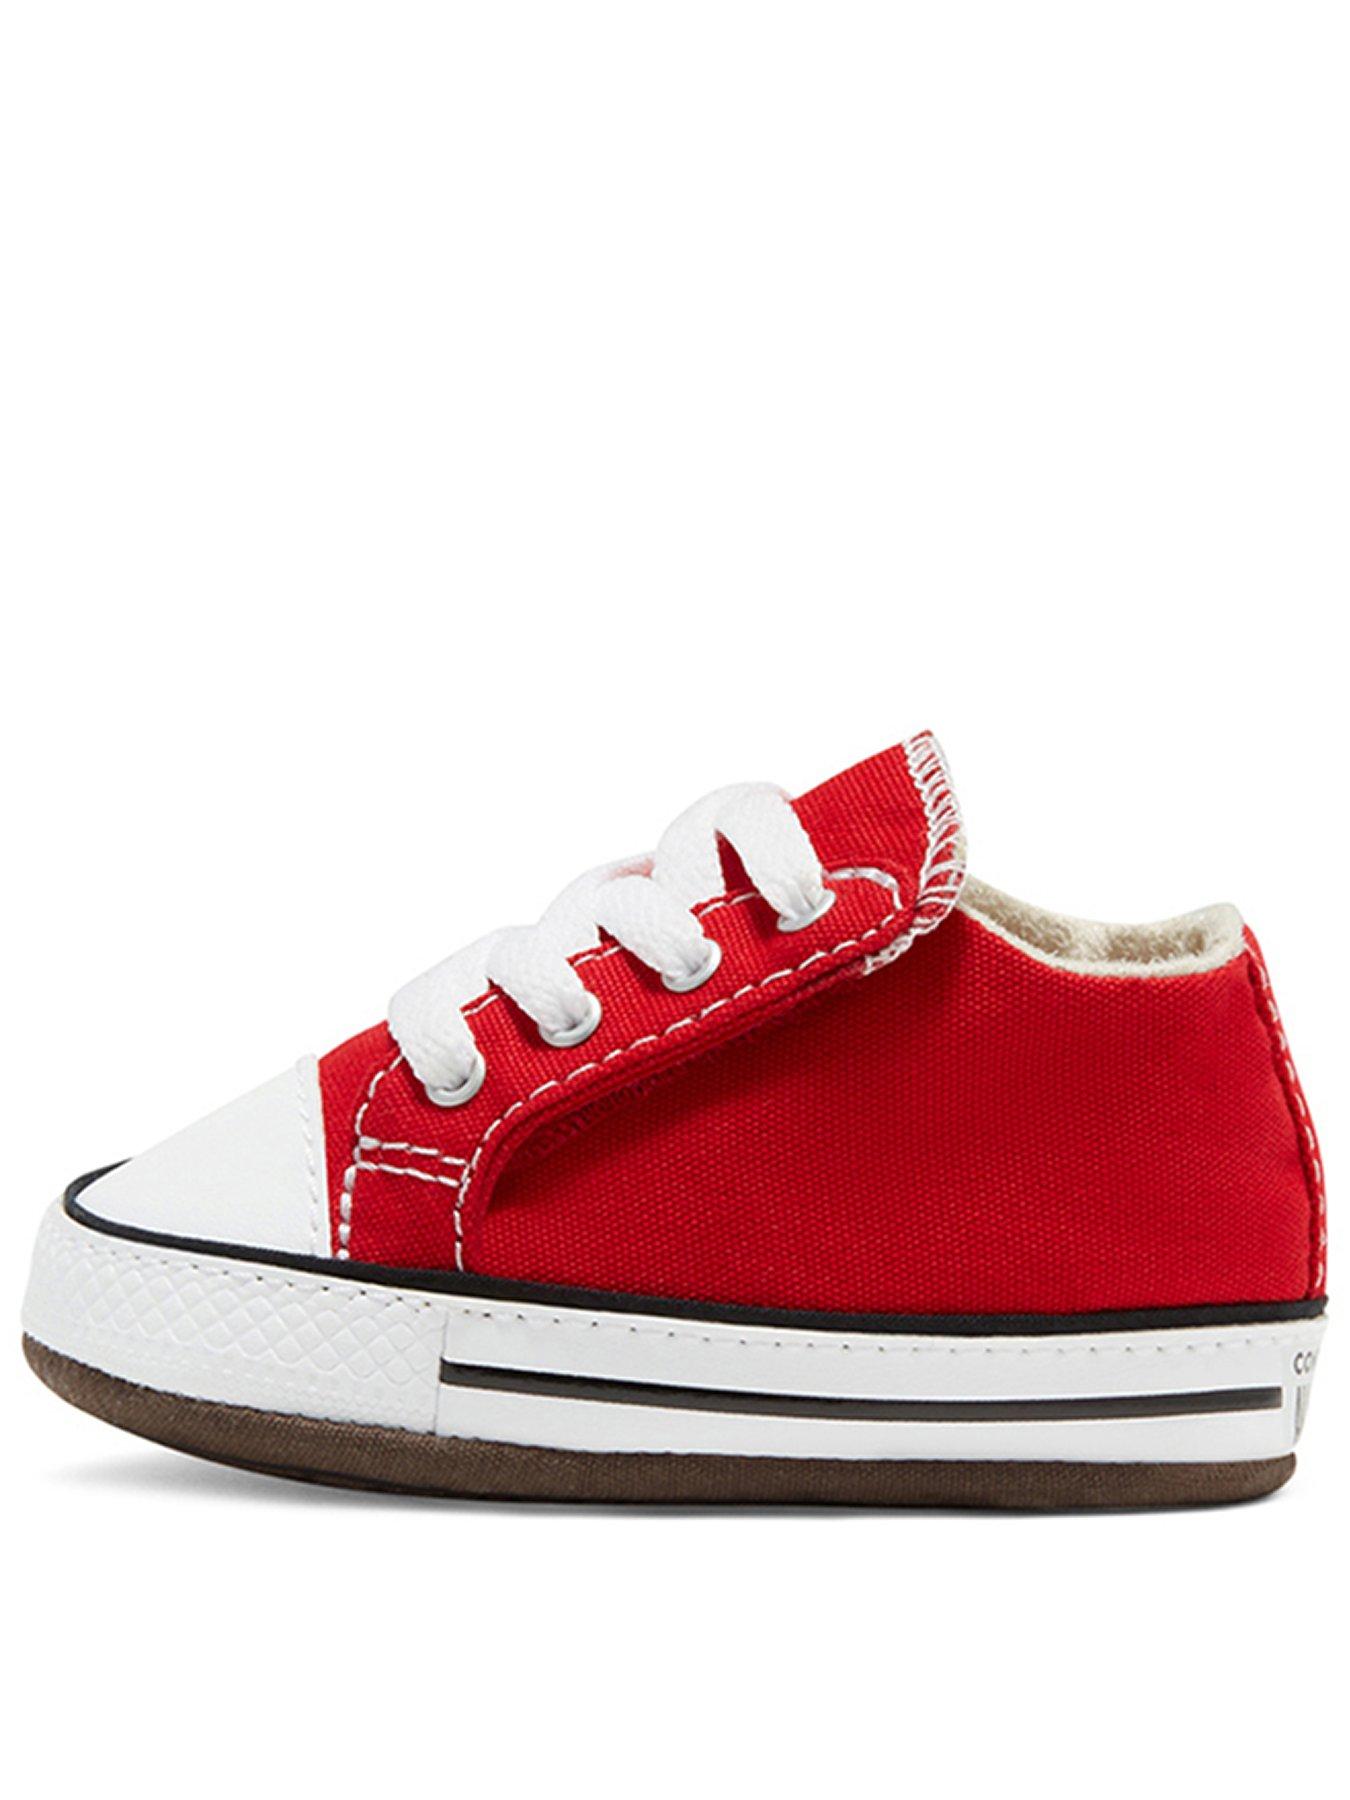 childrens red converse boots